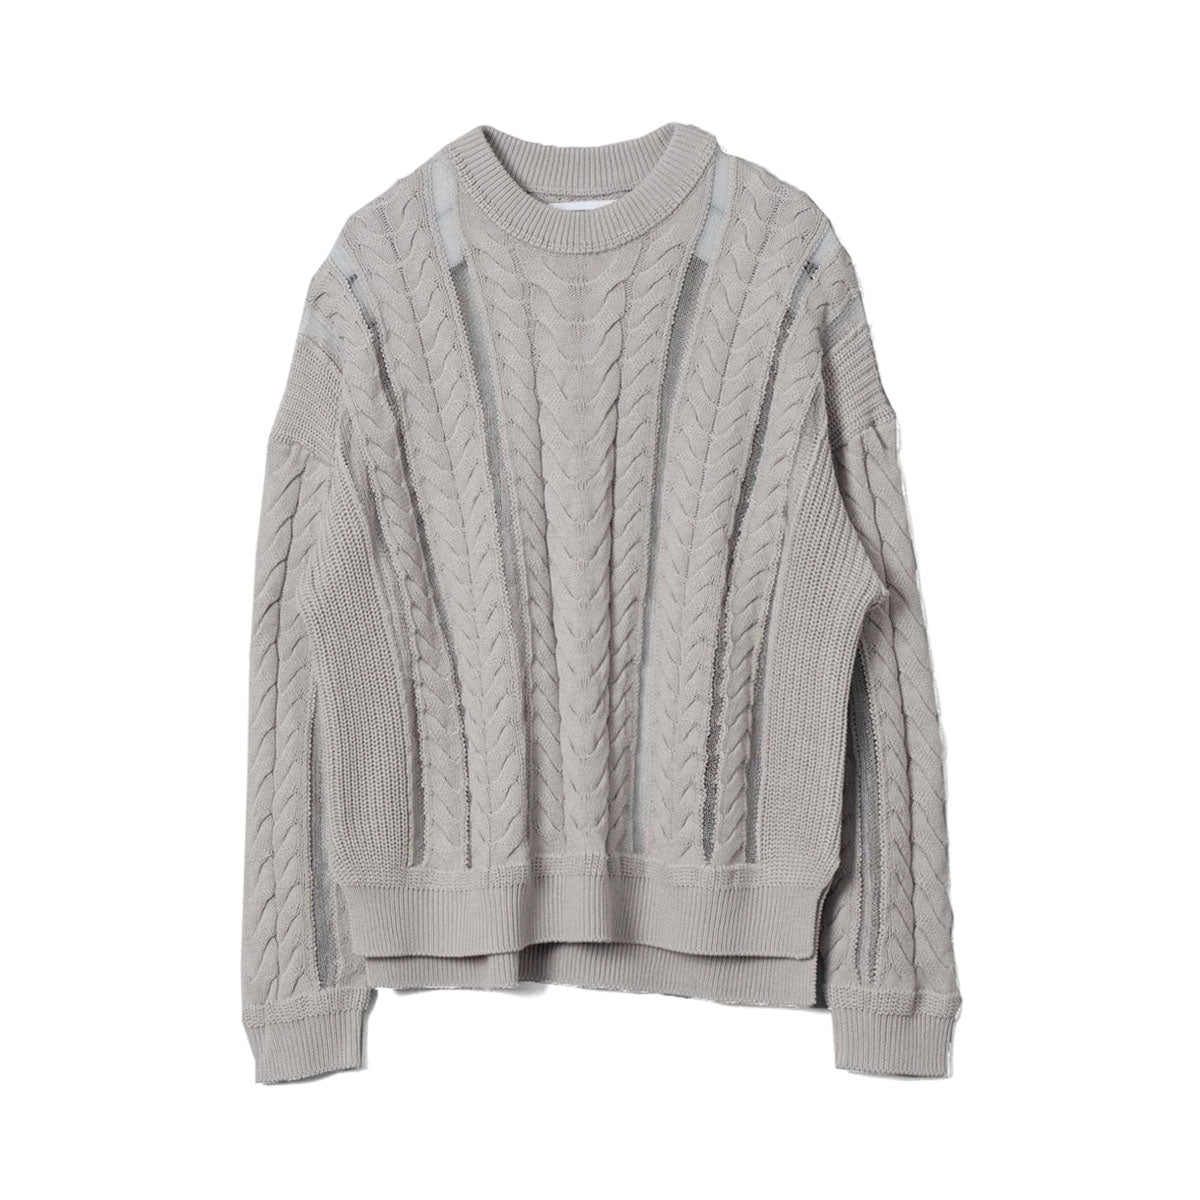 MAISON SPECIAL]Cable Knitting Sheer Intarsia Prime-Over Crew Neck